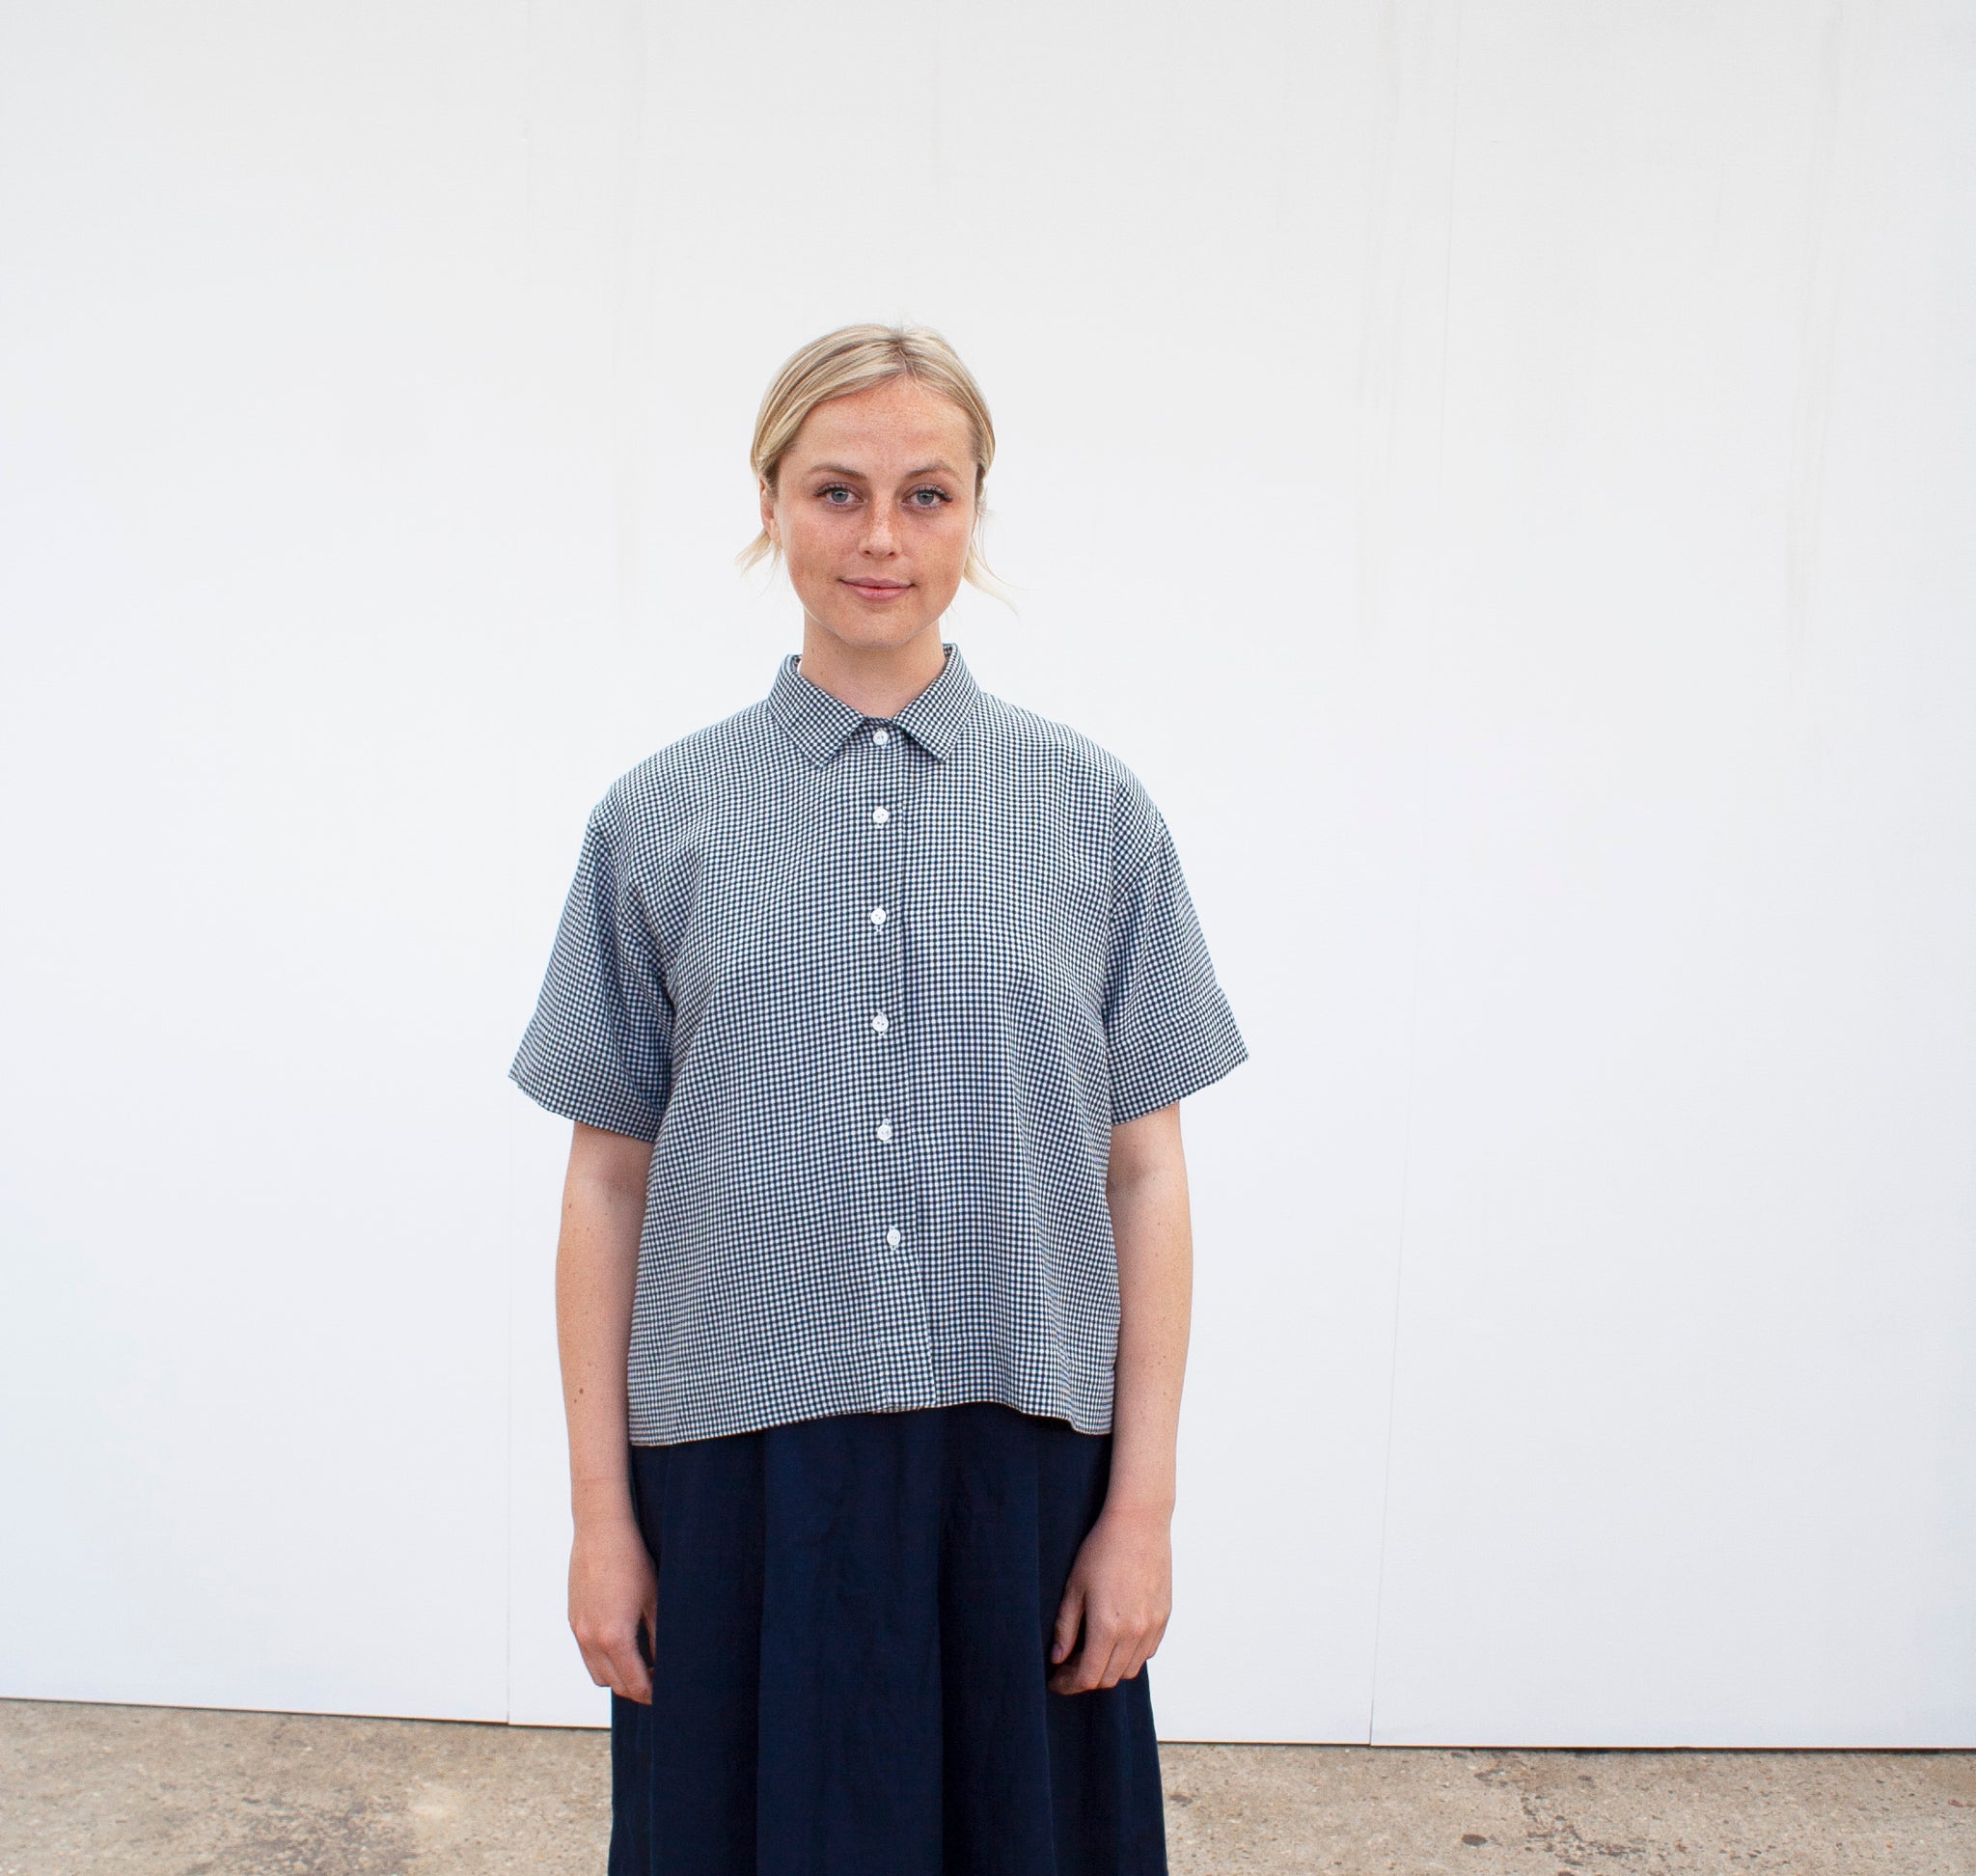 a blonde woman looking straight ahead in a white space wearing a short sleeved gingham shirt